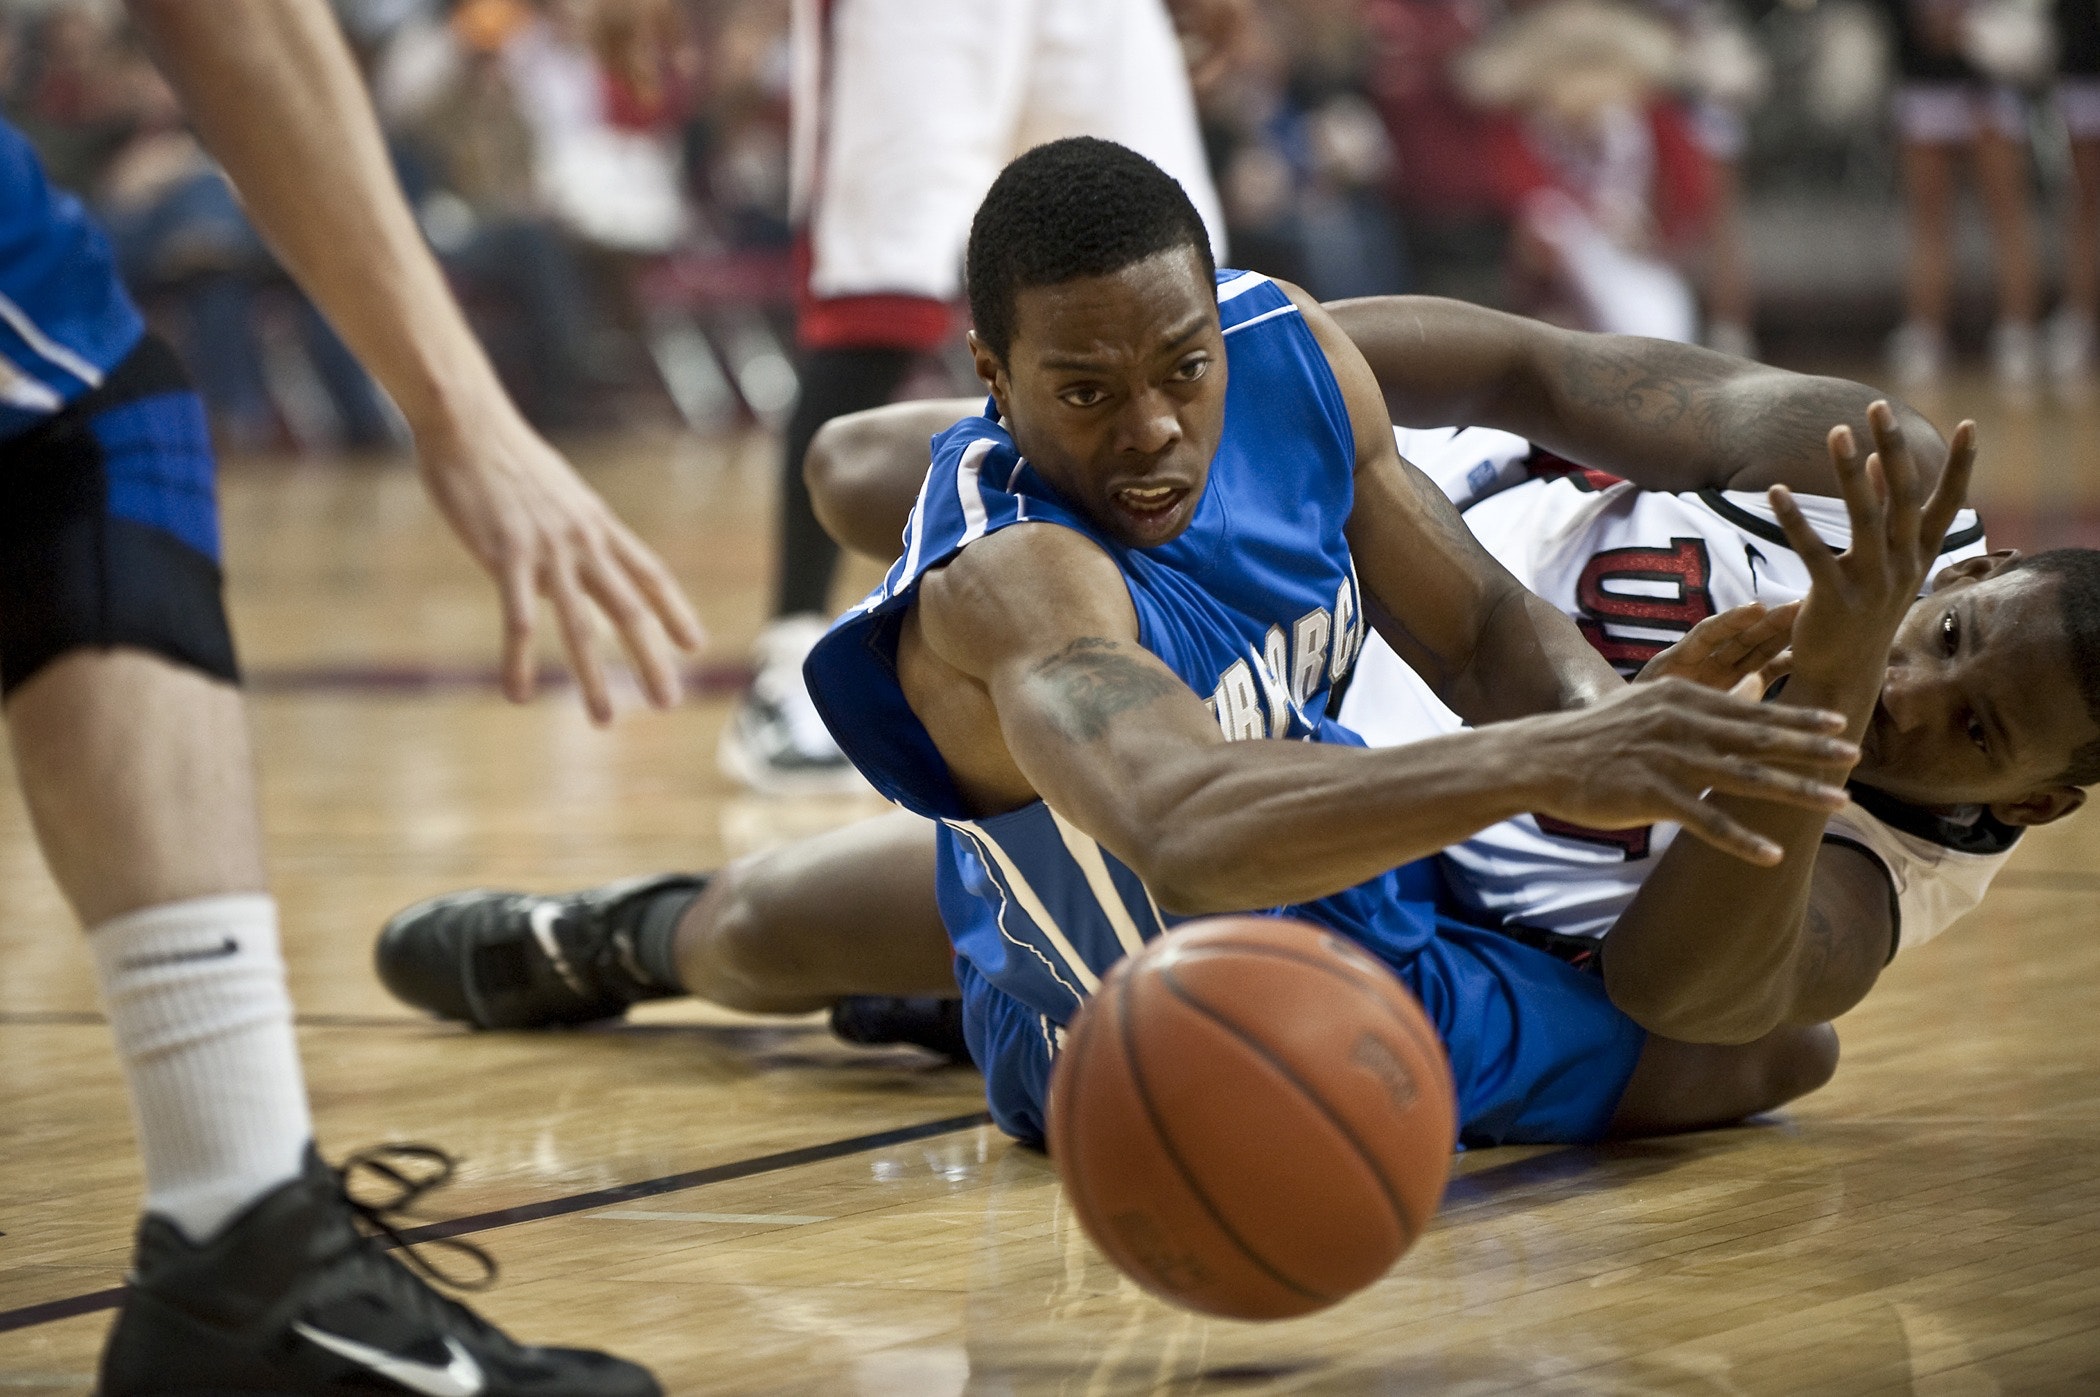 4 Characteristics of Mentally Tough Players